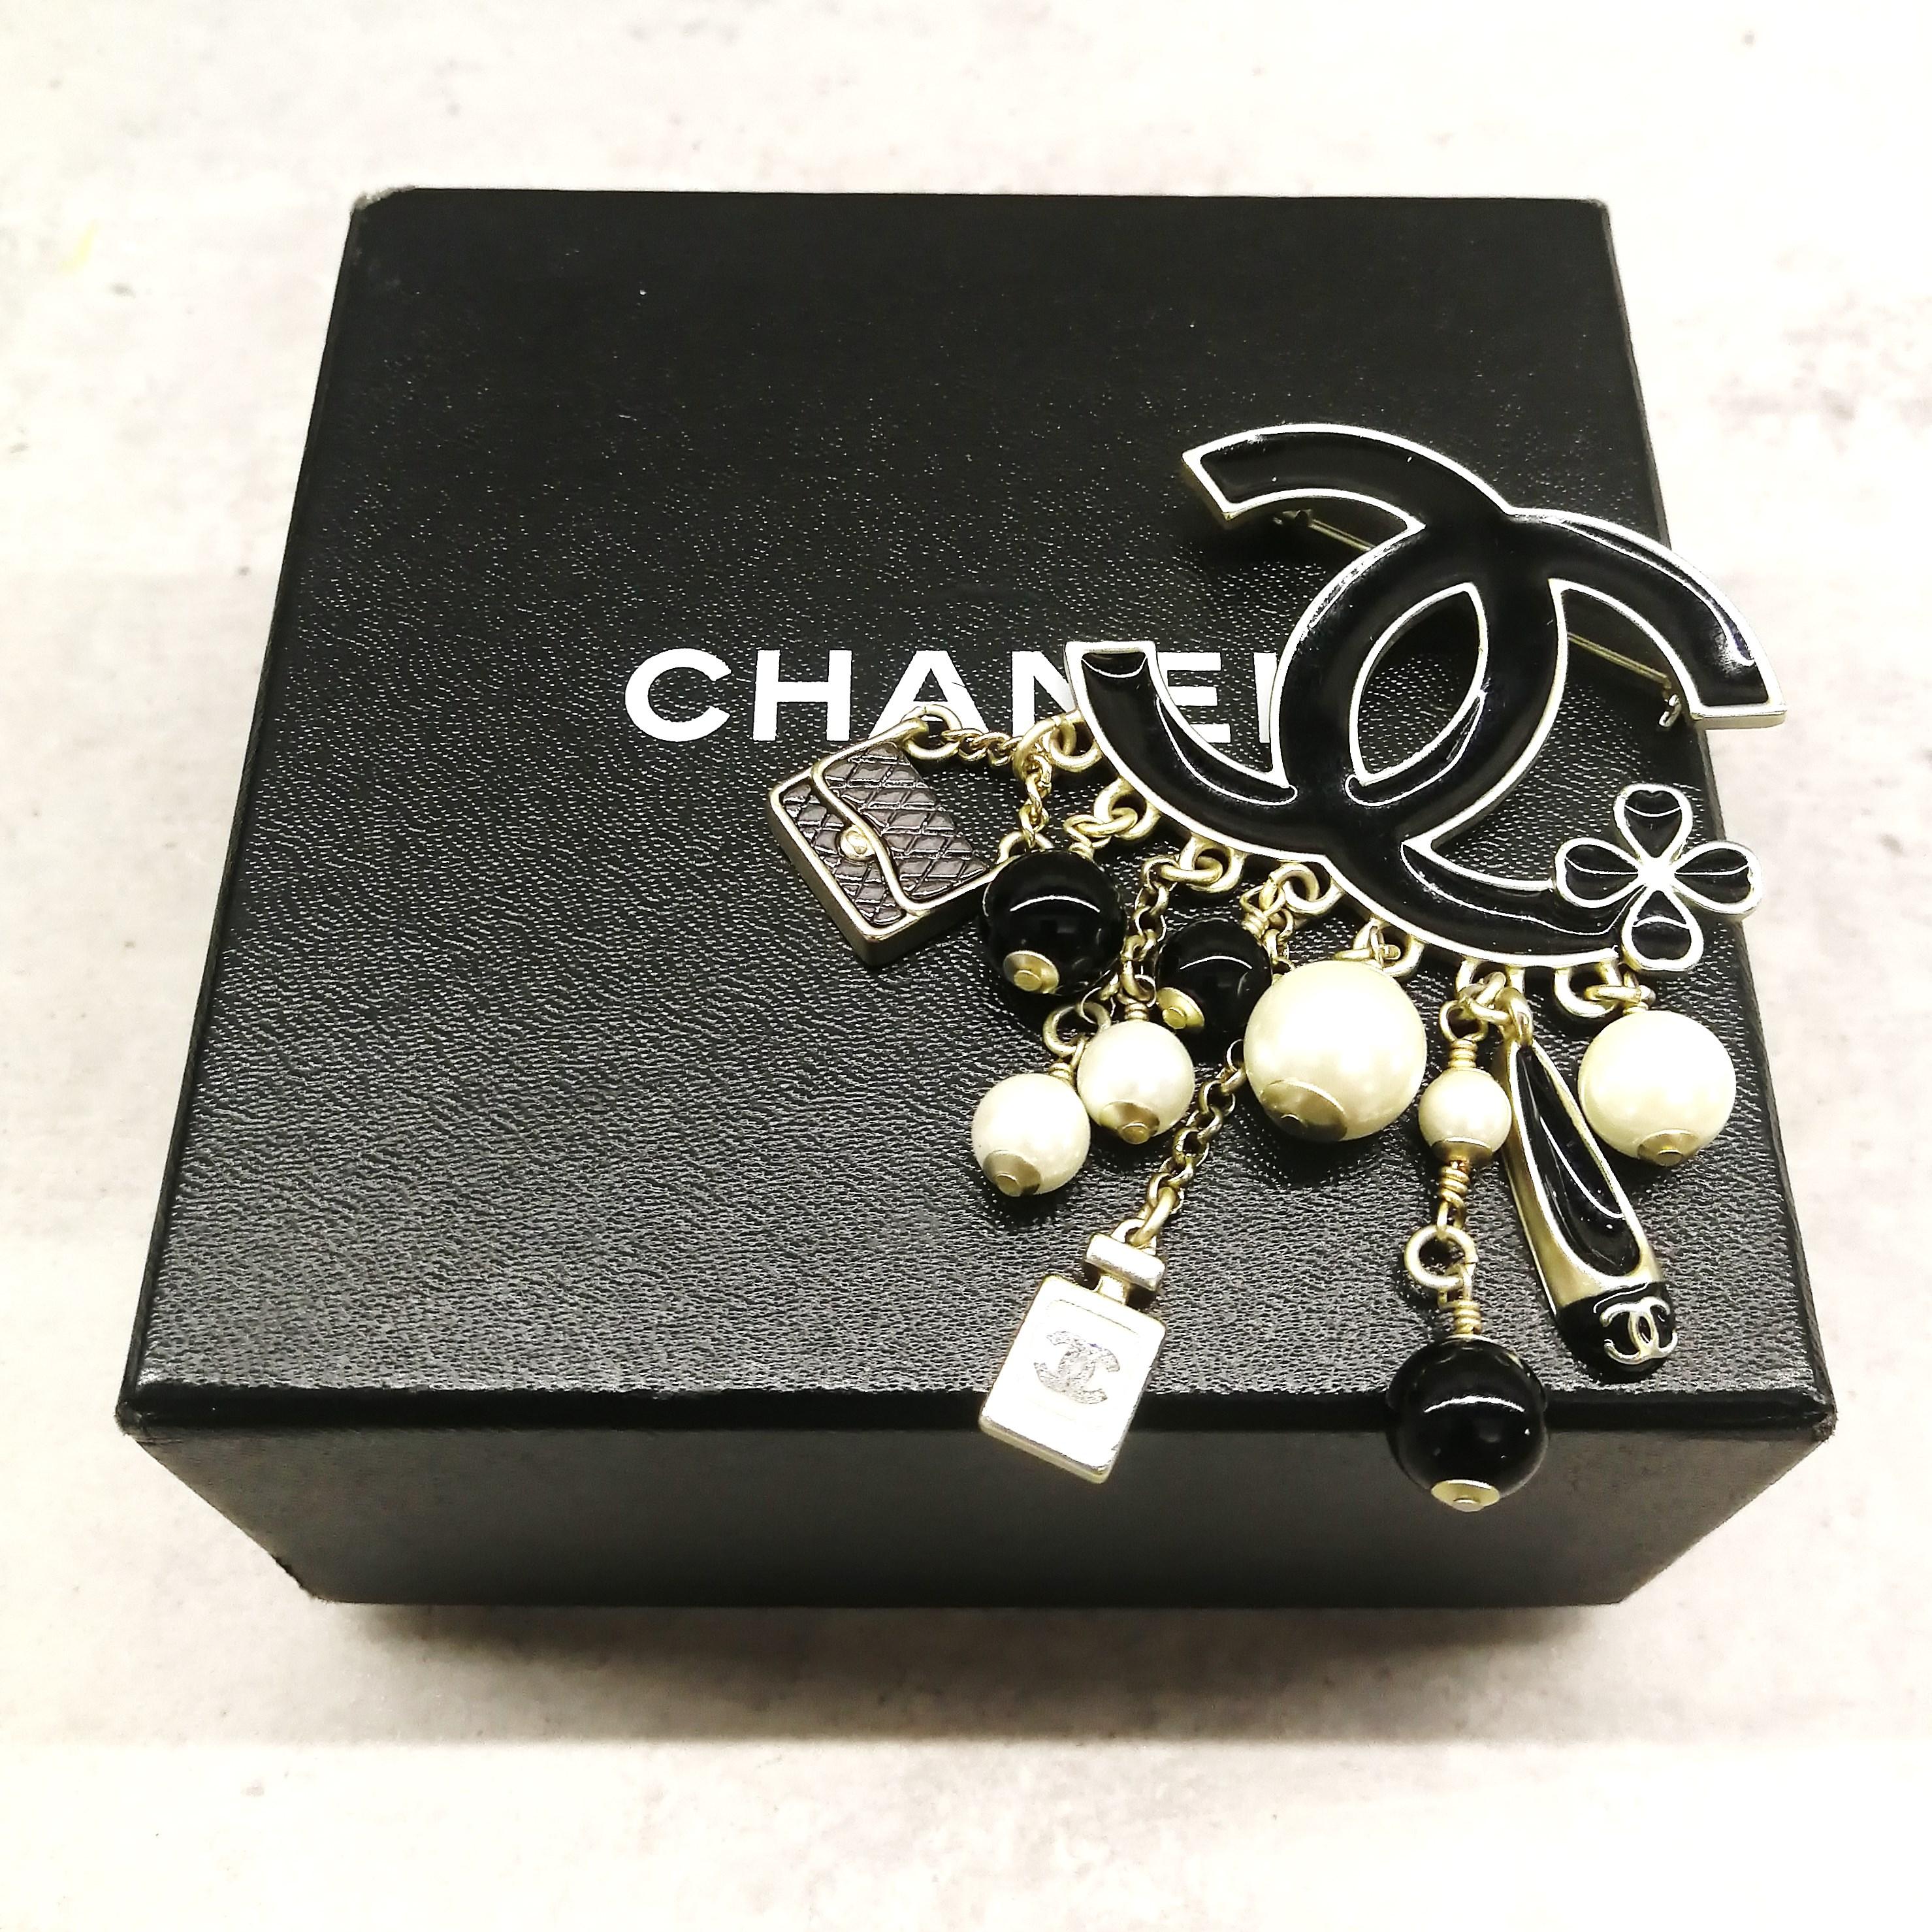 Large black enamelled and silvered metal Double C 'charm' brooch, Chanel, 2014 2